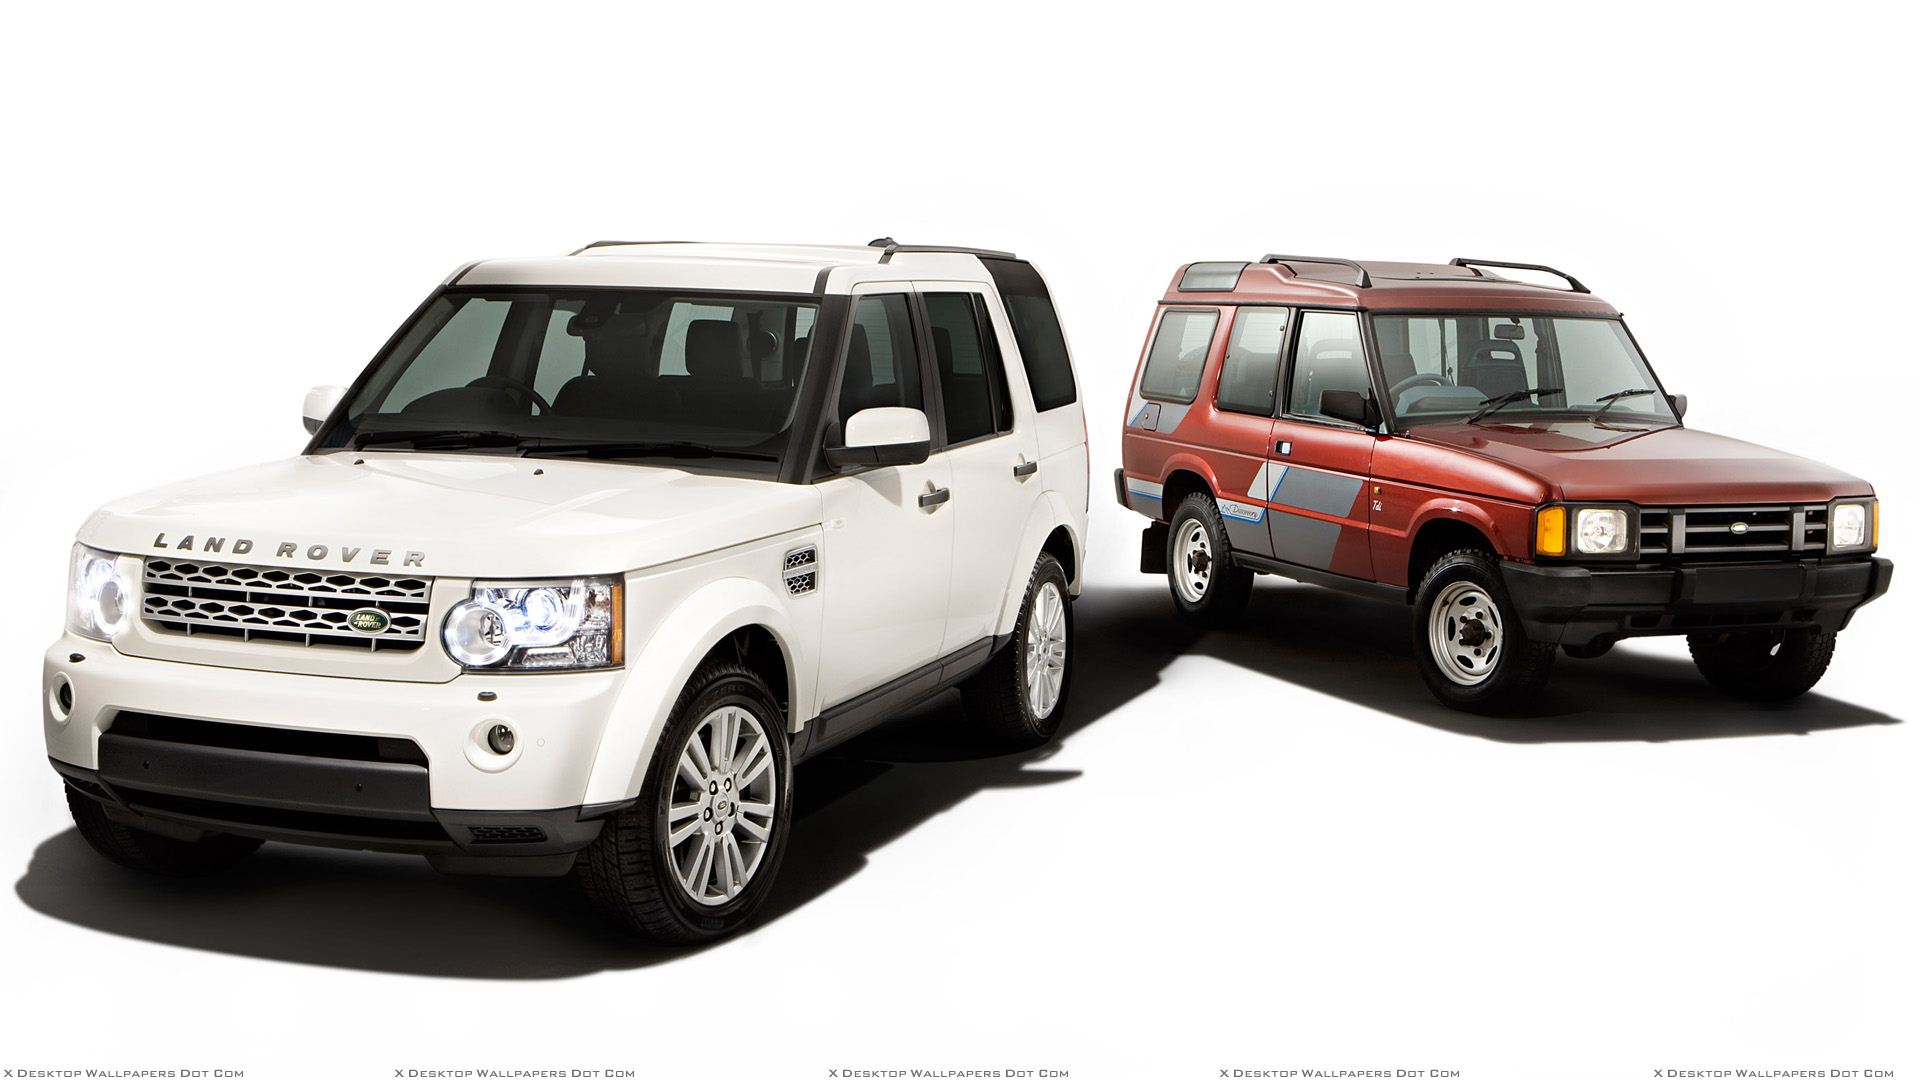 Land Rover Discovery Wallpaper Photos Image In HD